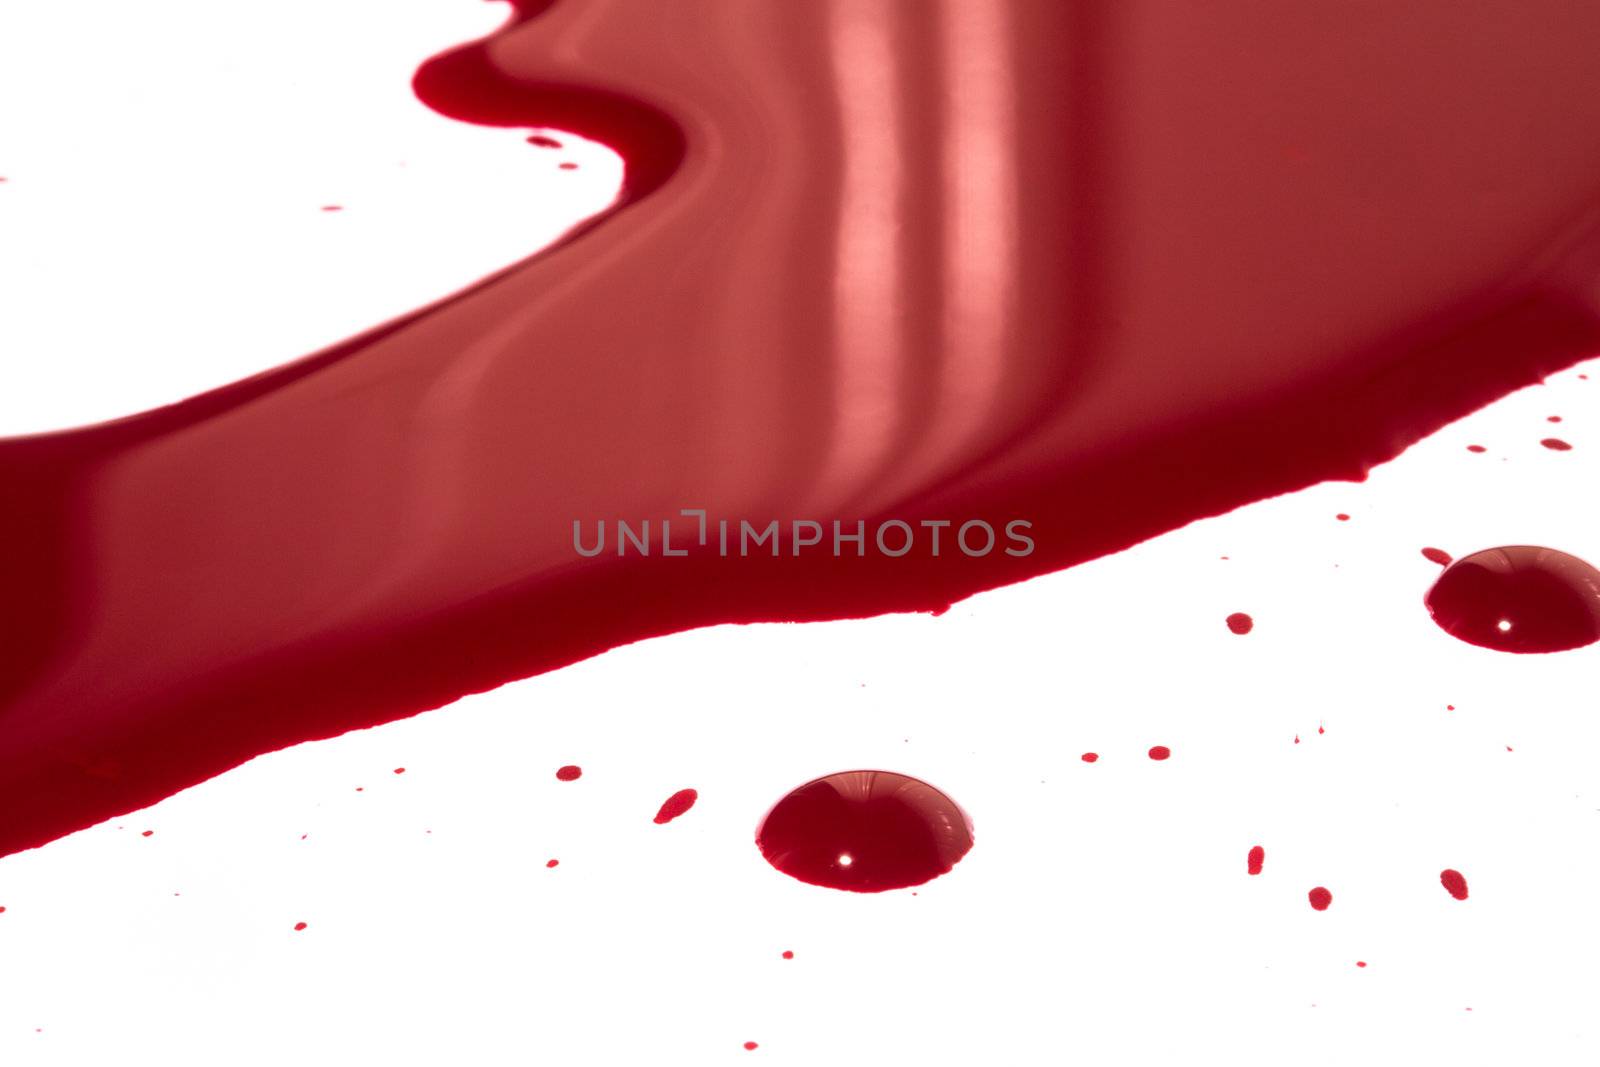 Blood or paint puddle by jamenpercy